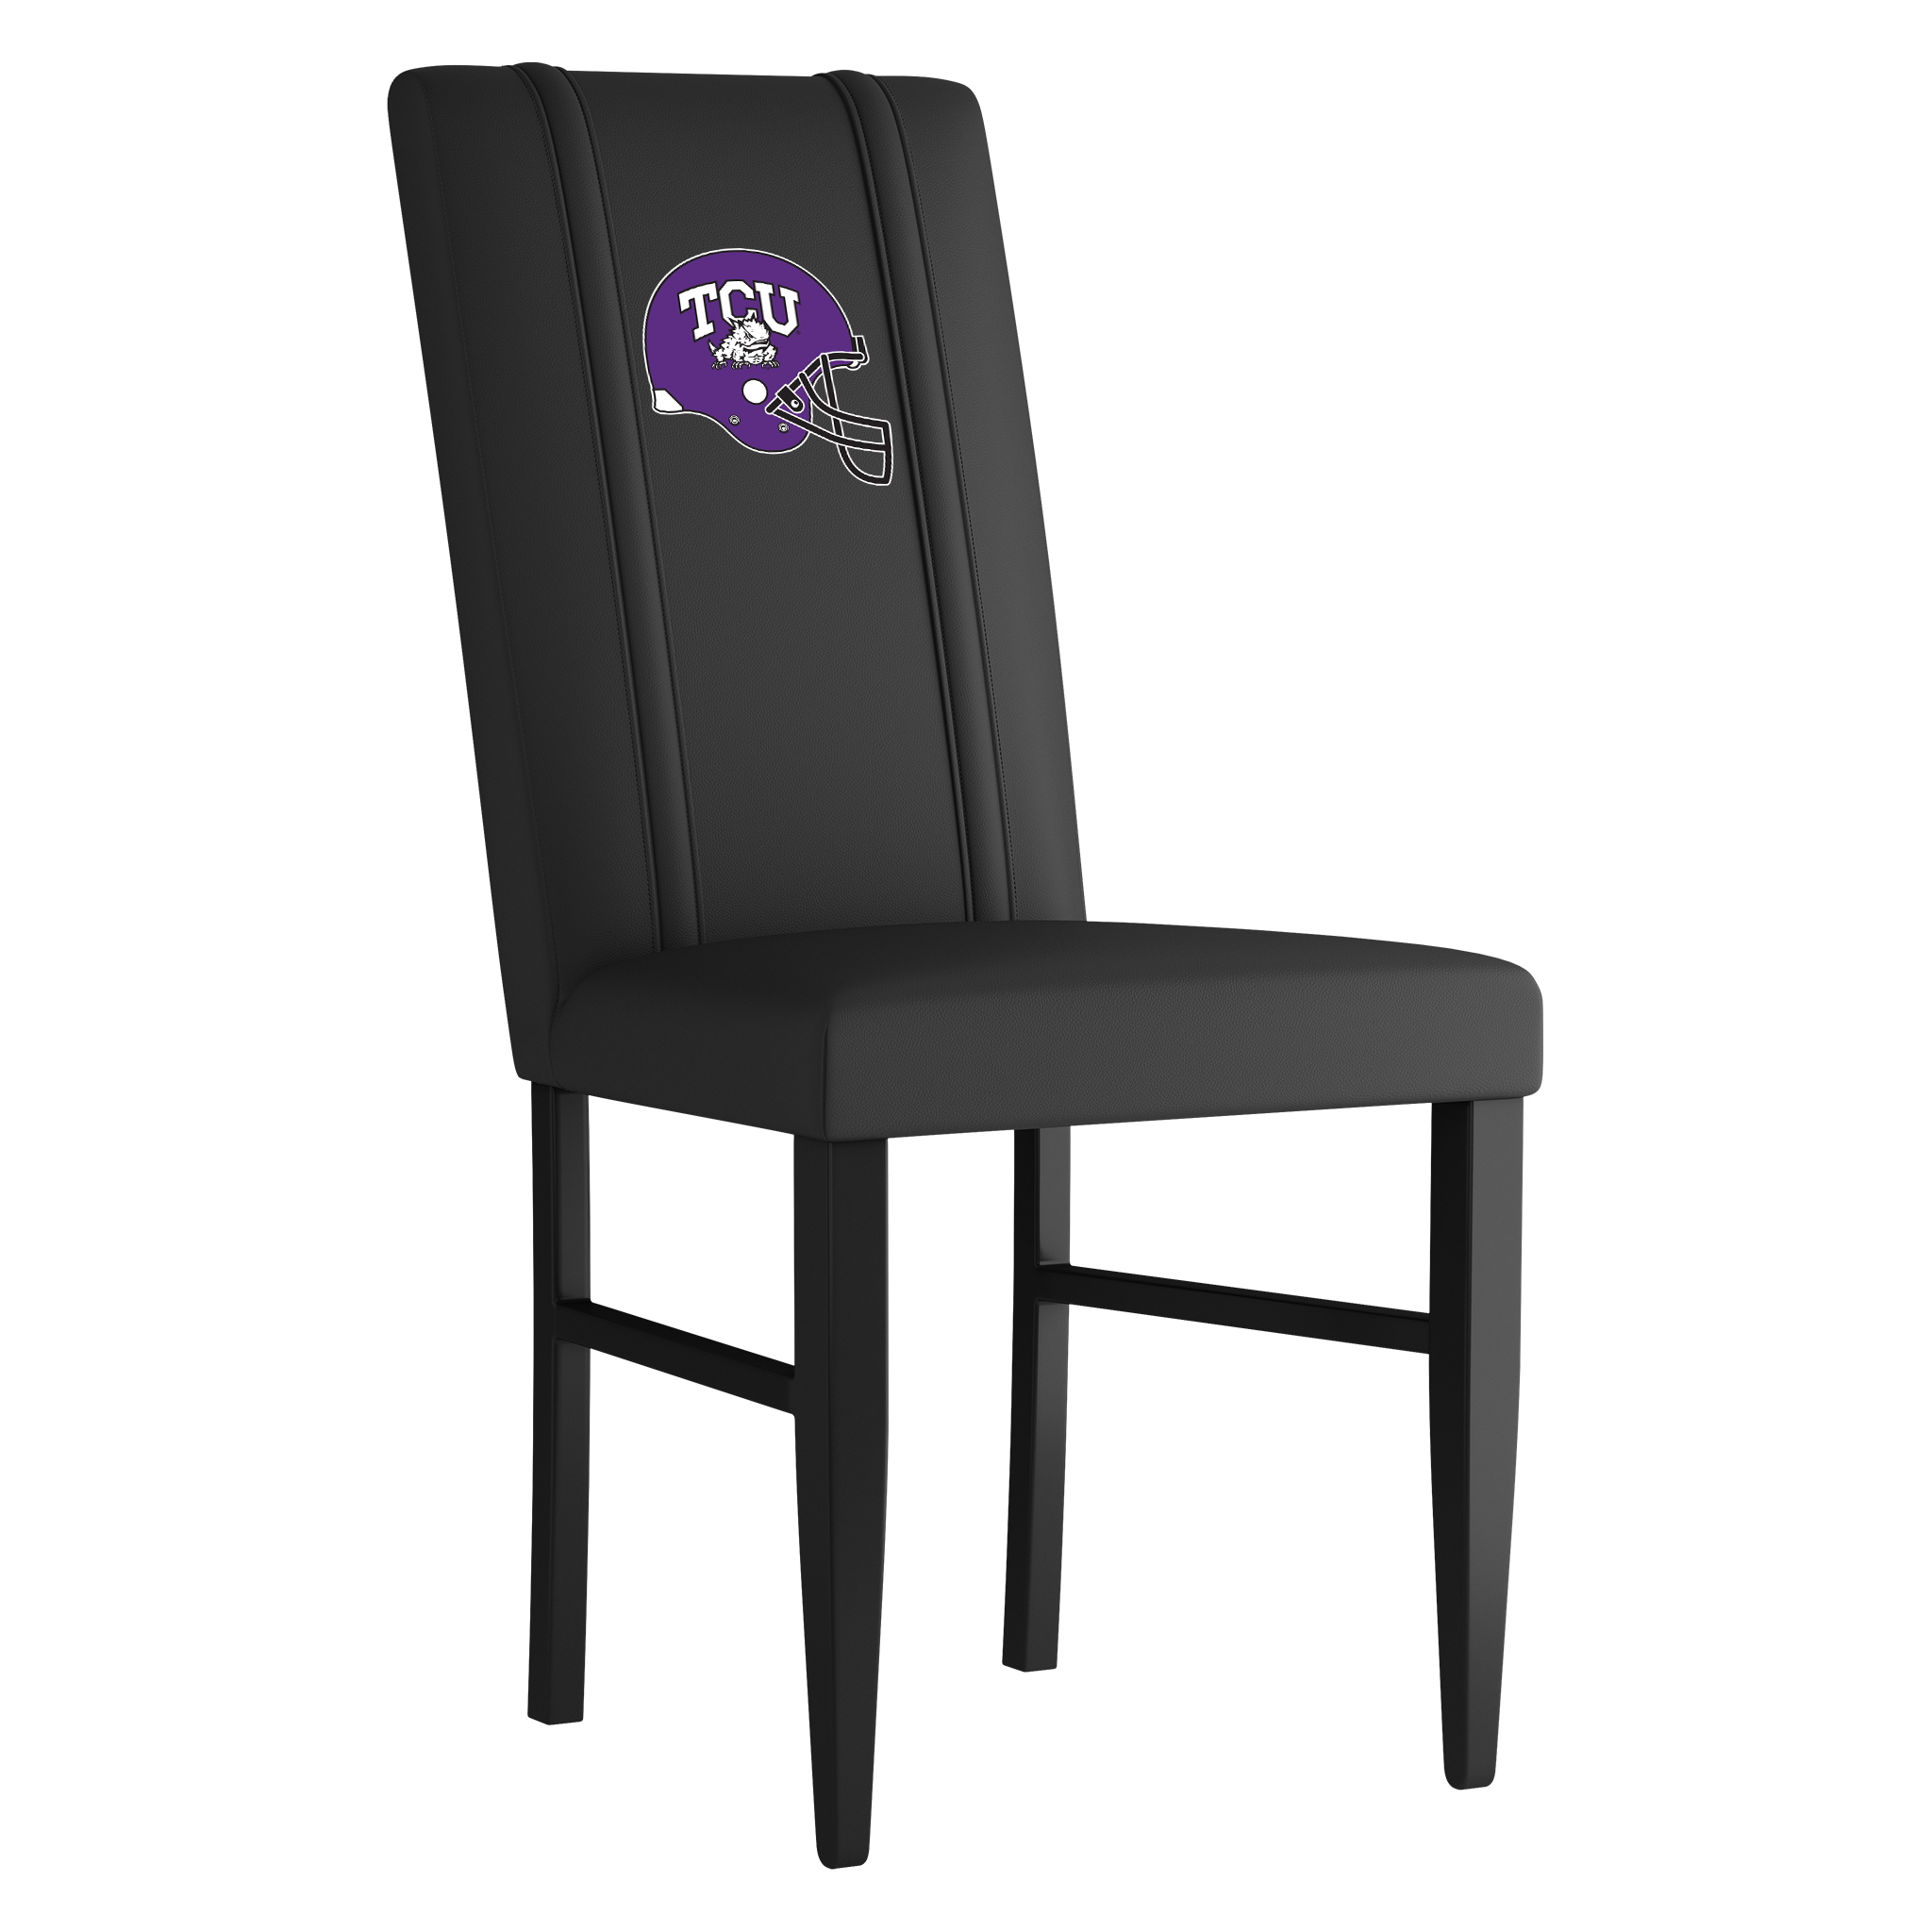 Tcu Horned Frogs Side Chair 2000 With Tcu Horned Frogs Alternate